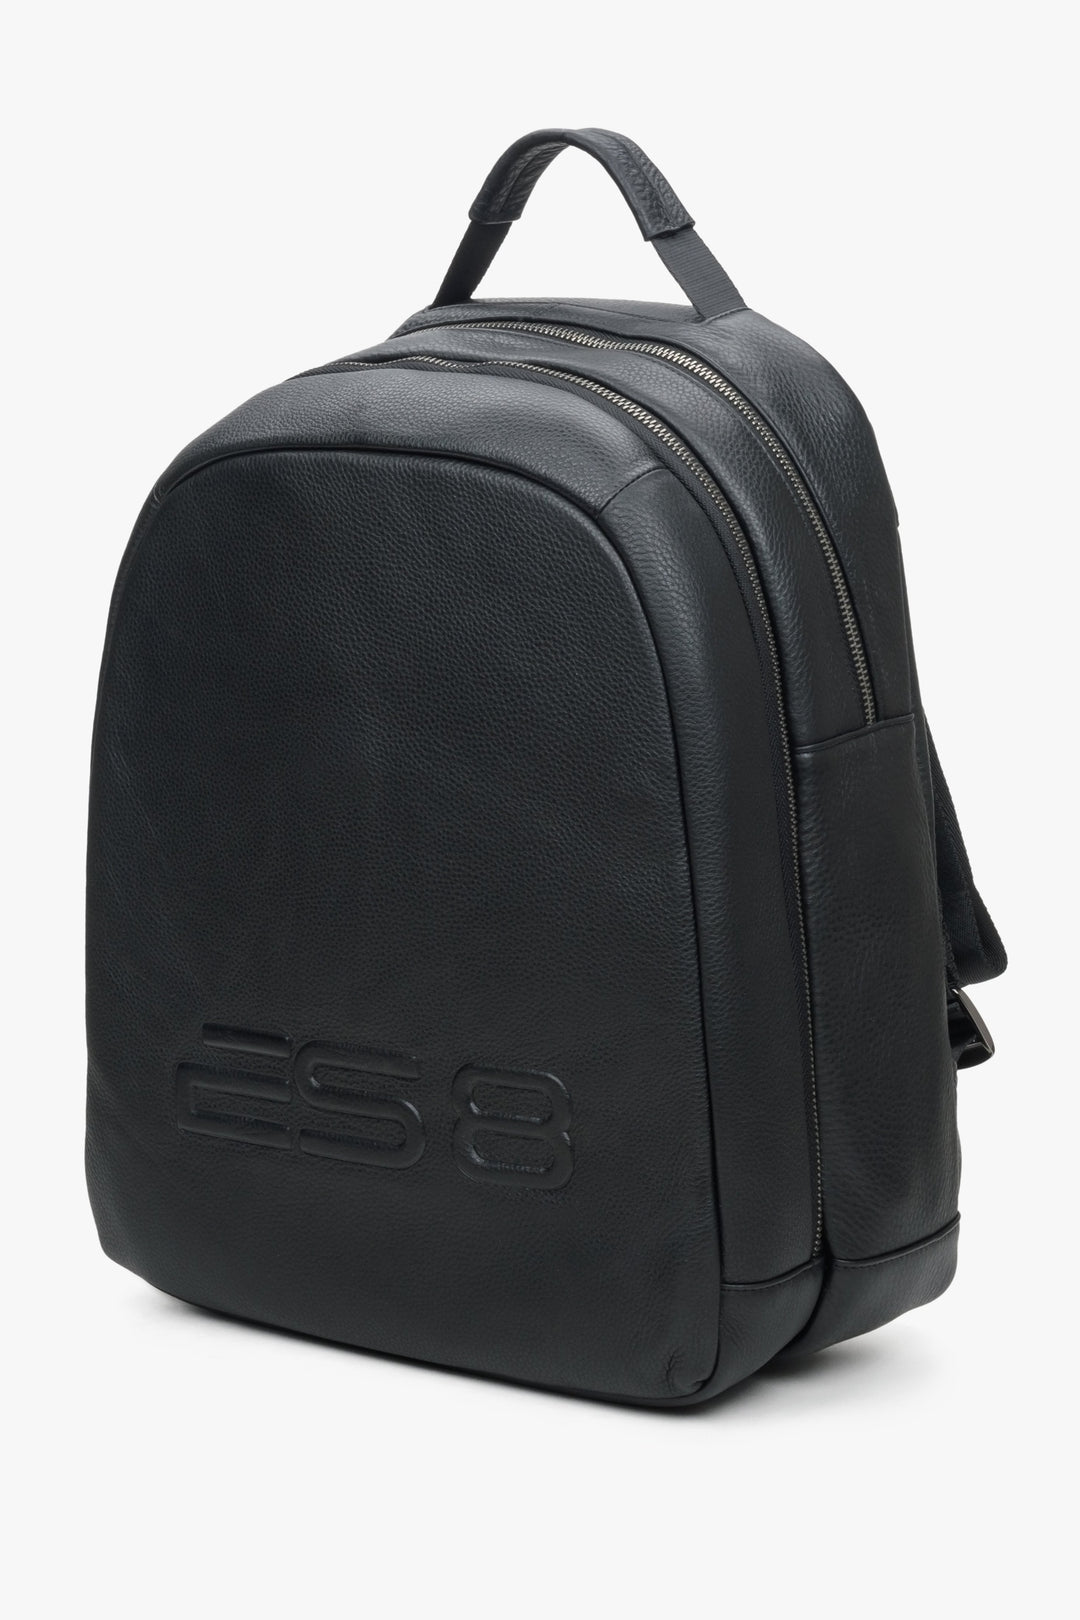 A men's black leather backpack by ES8 - front.